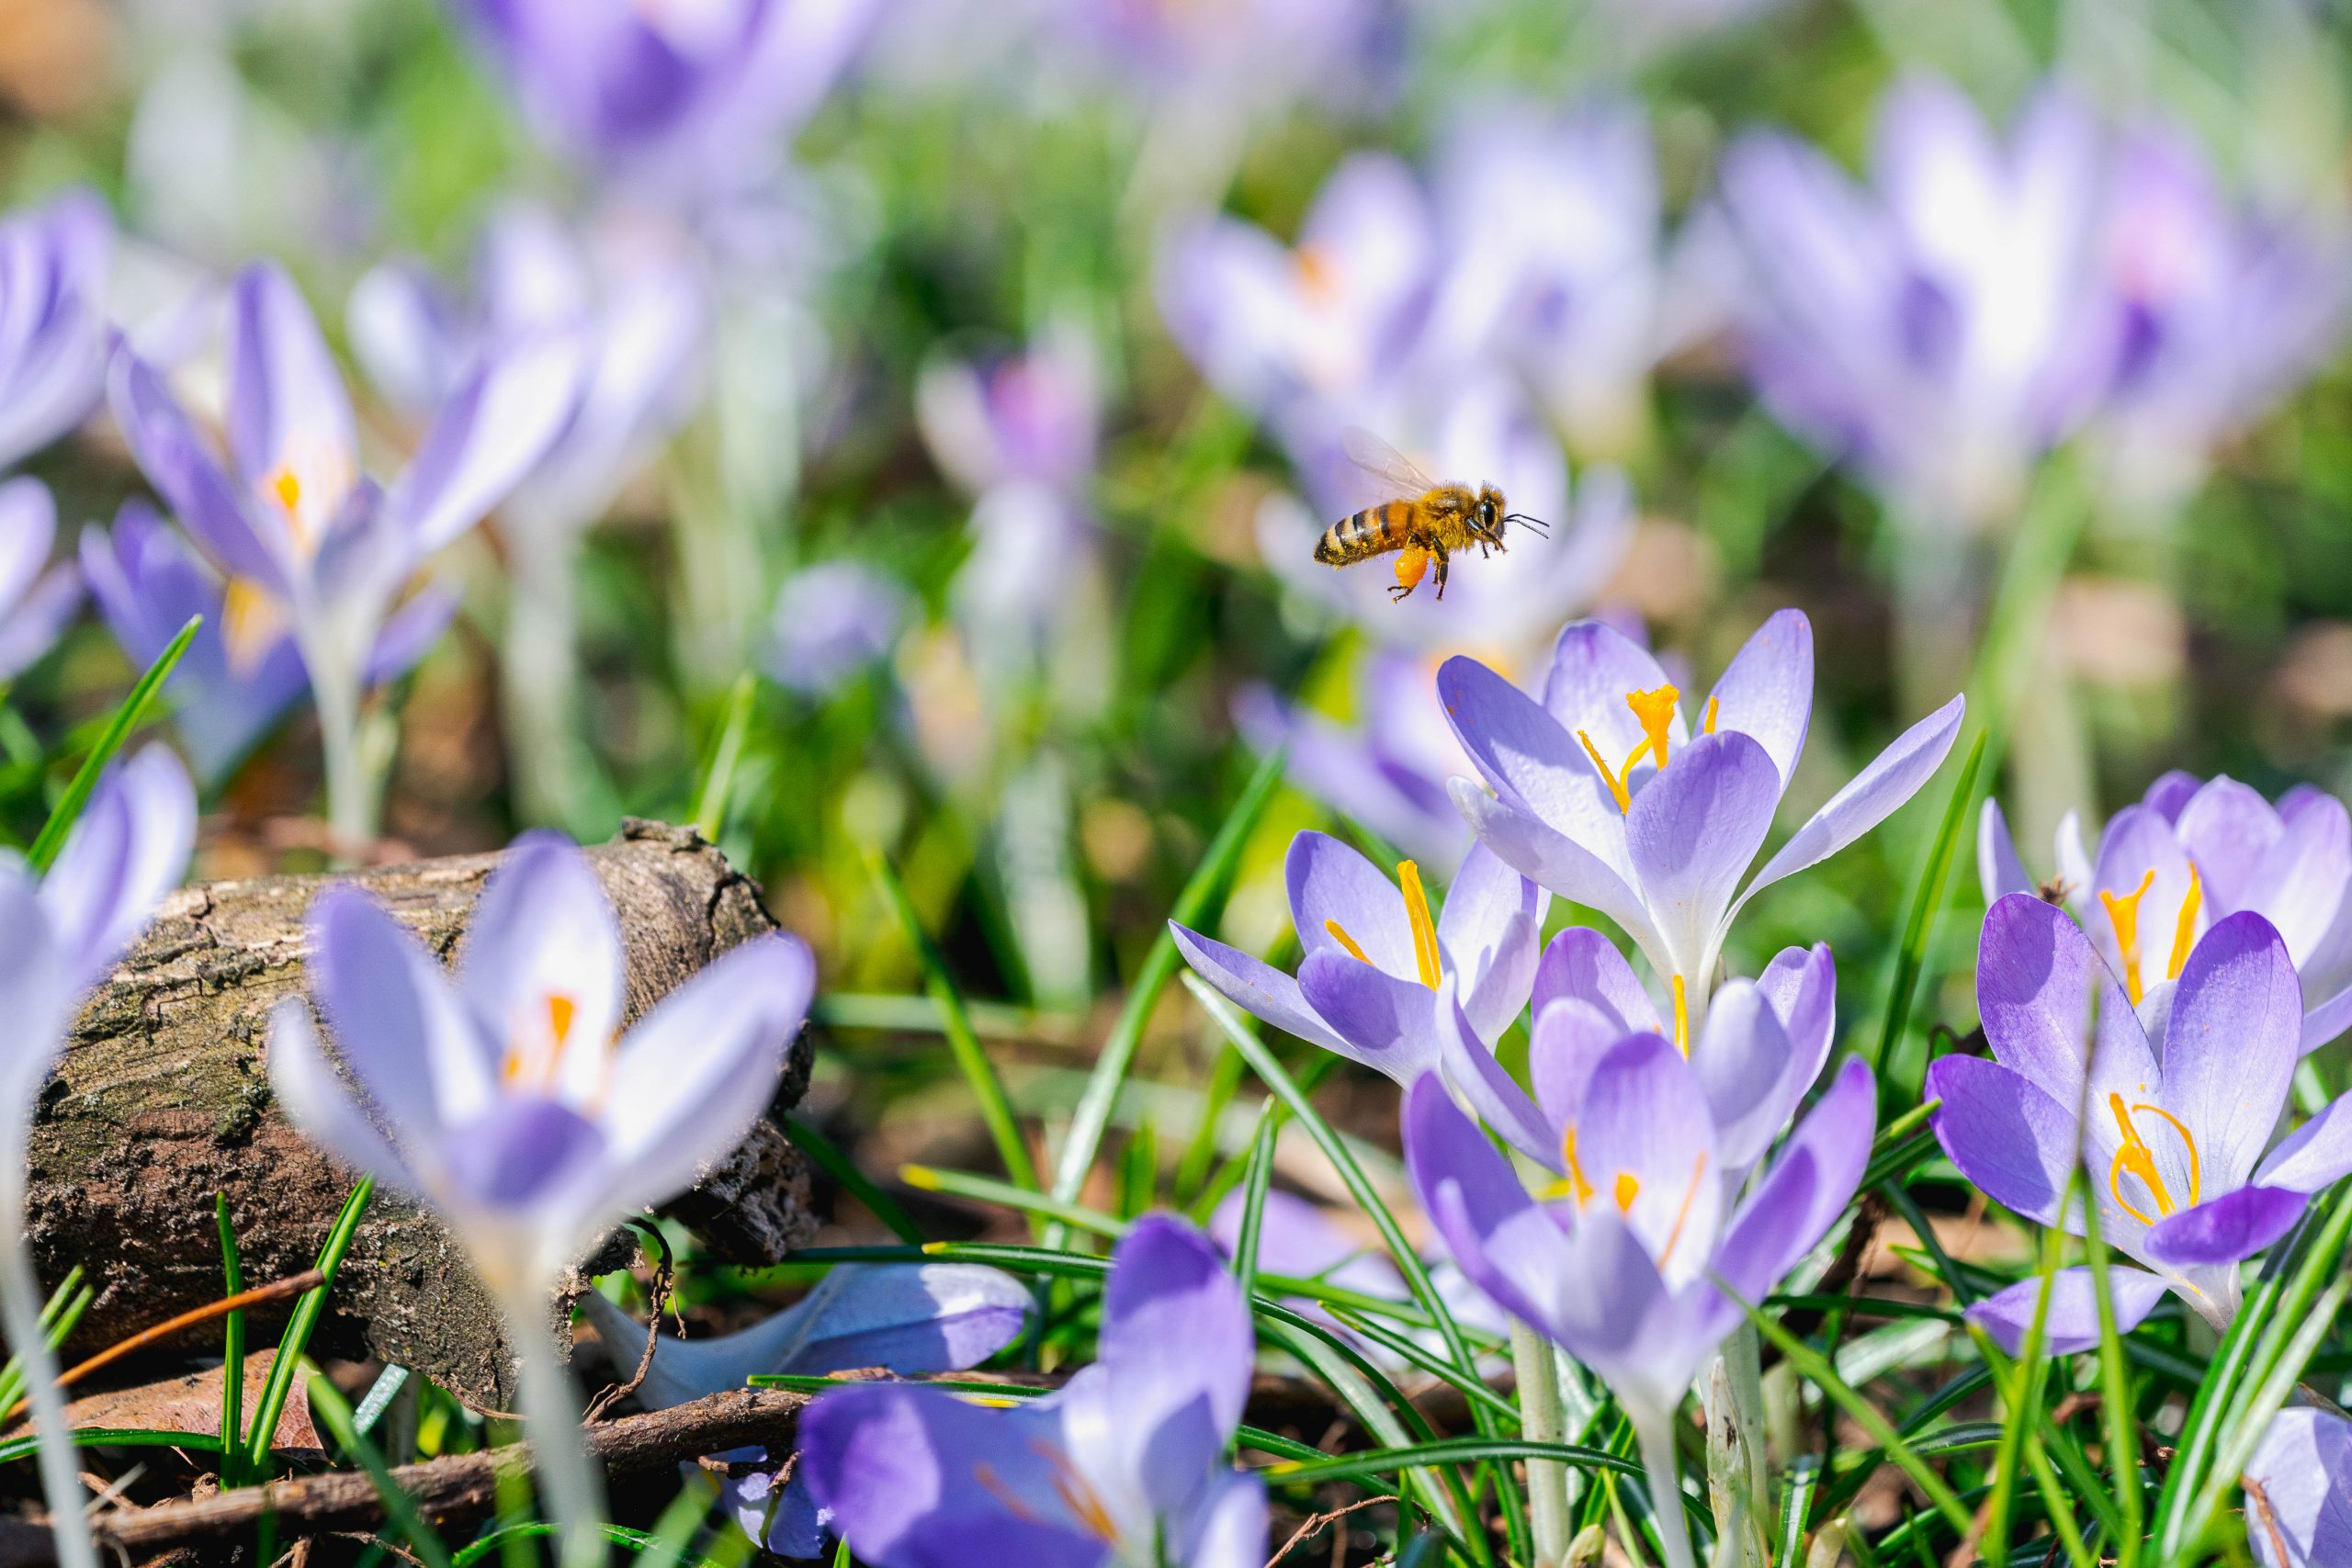 A bee hovers above a field of bright purple and yellow crocus flowers